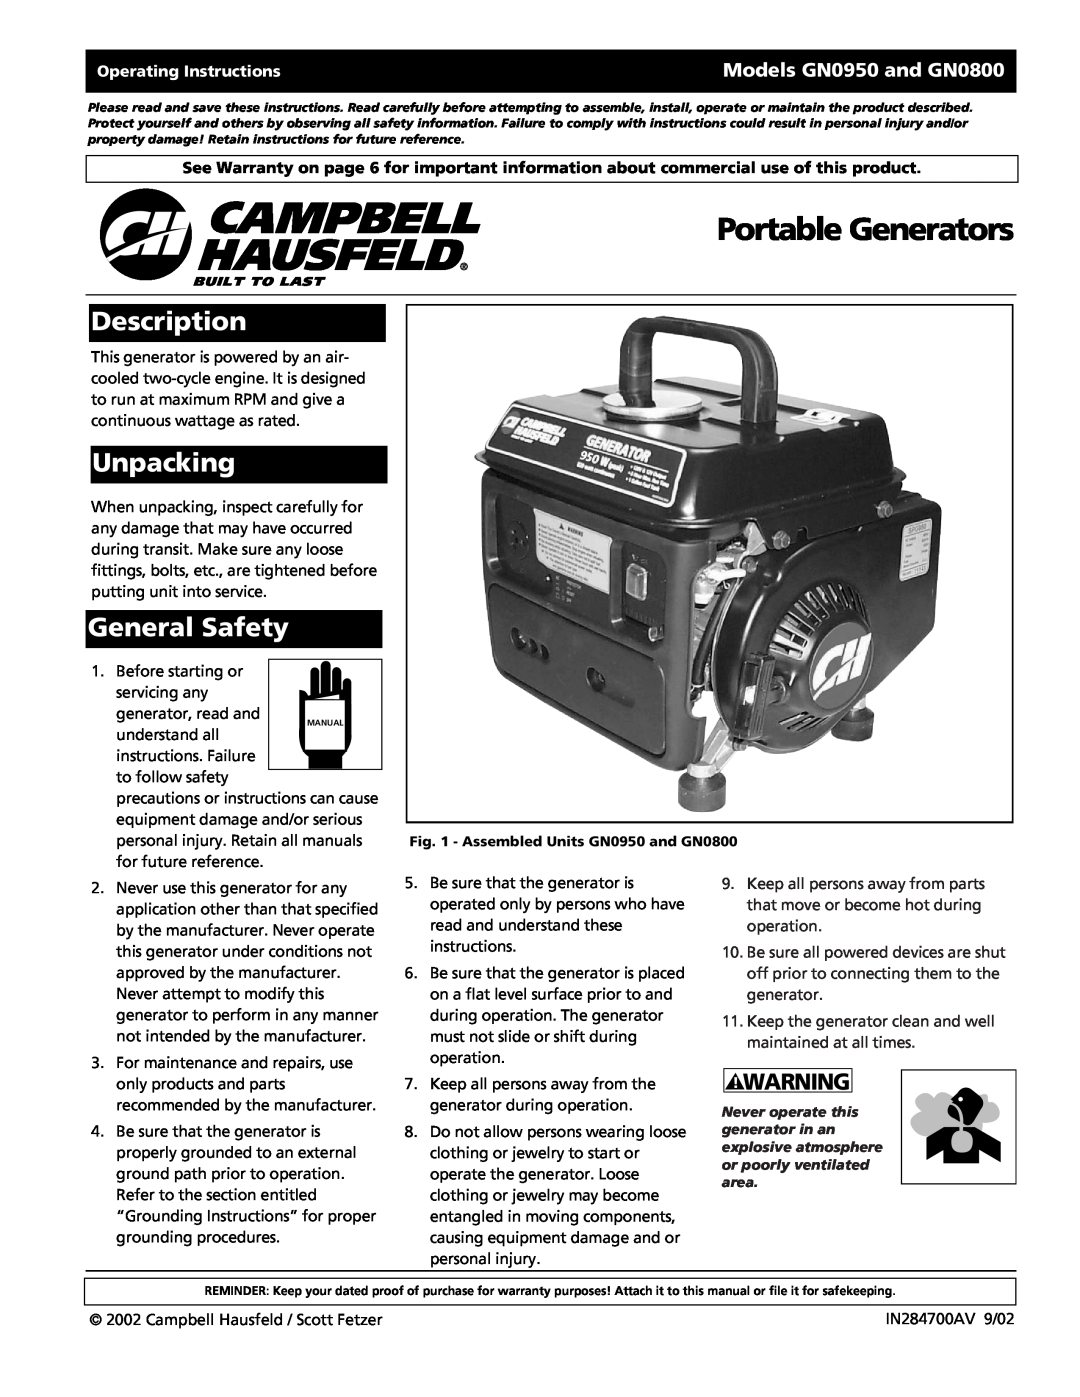 Campbell Hausfeld warranty Portable Generators, Description, Unpacking, General Safety, Models GN0950 and GN0800 